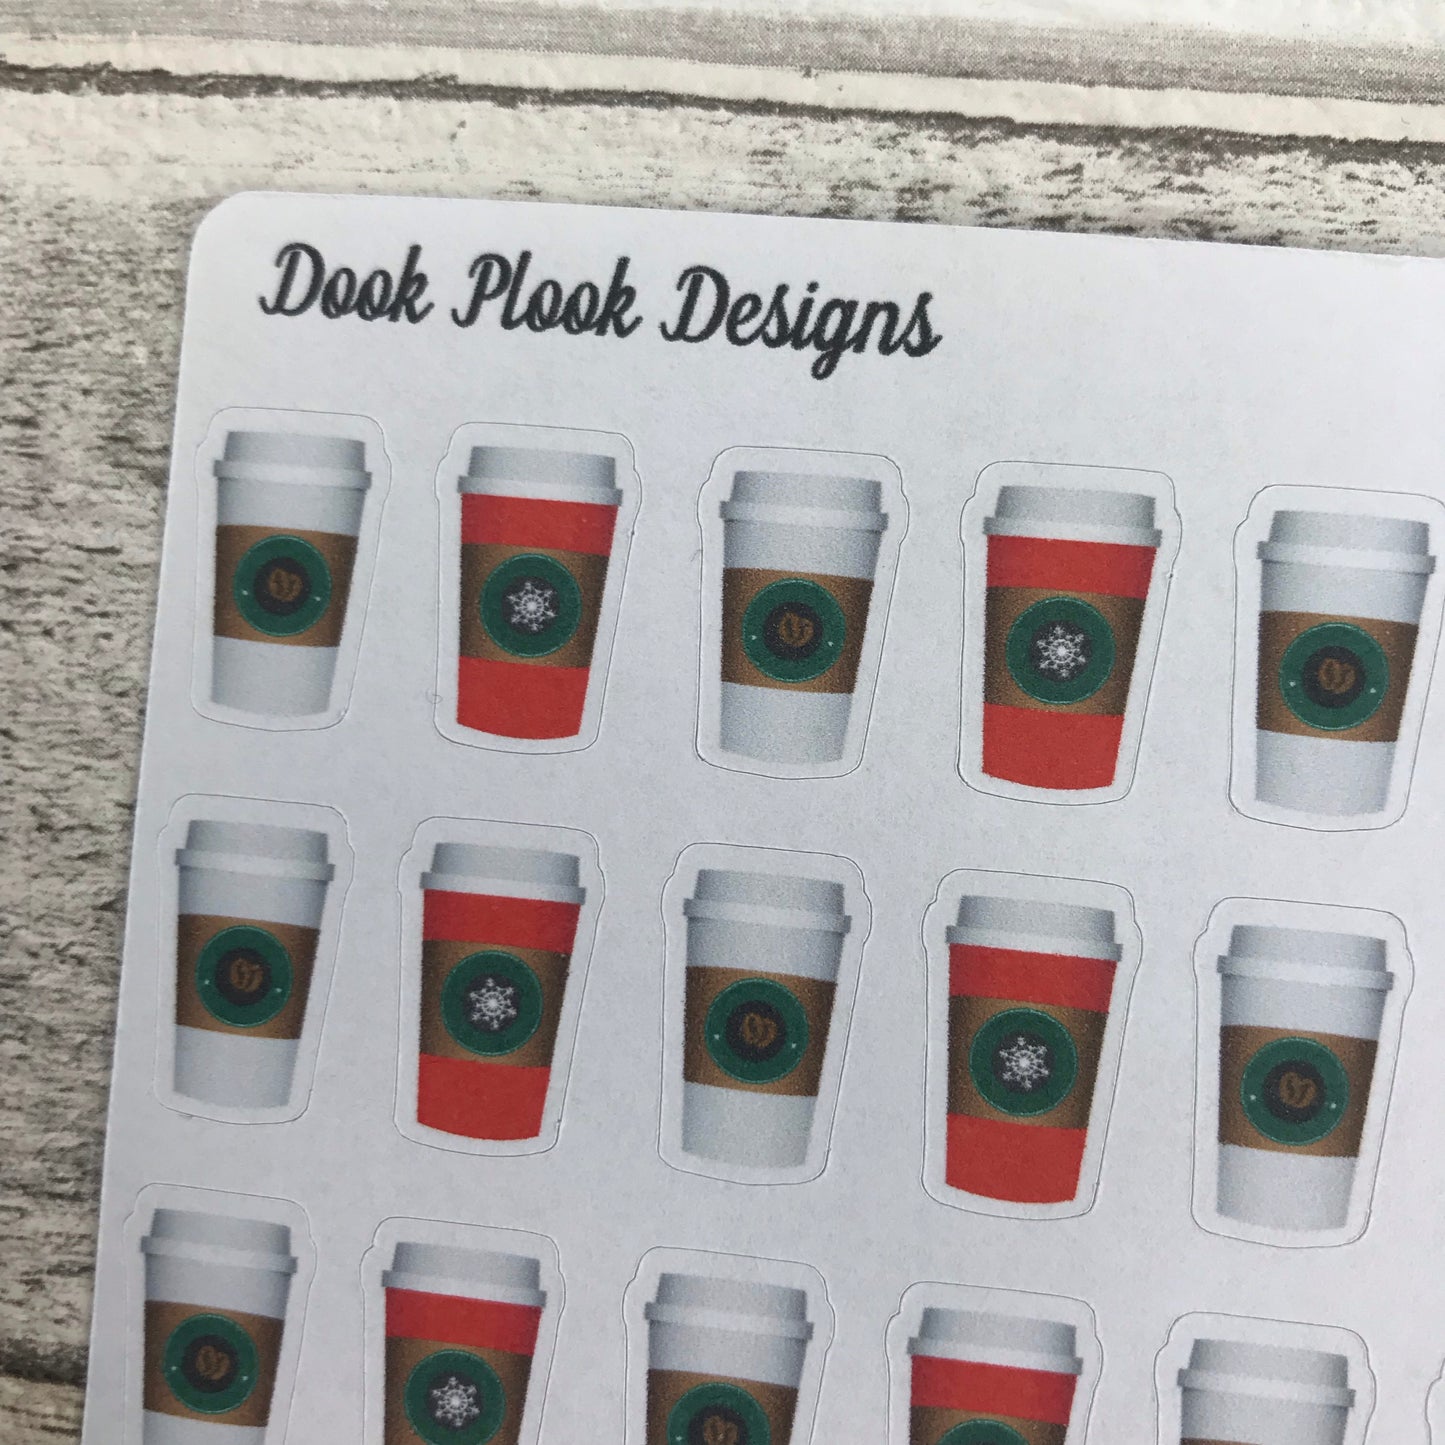 Coffee lovers stickers  (DPD313abc)